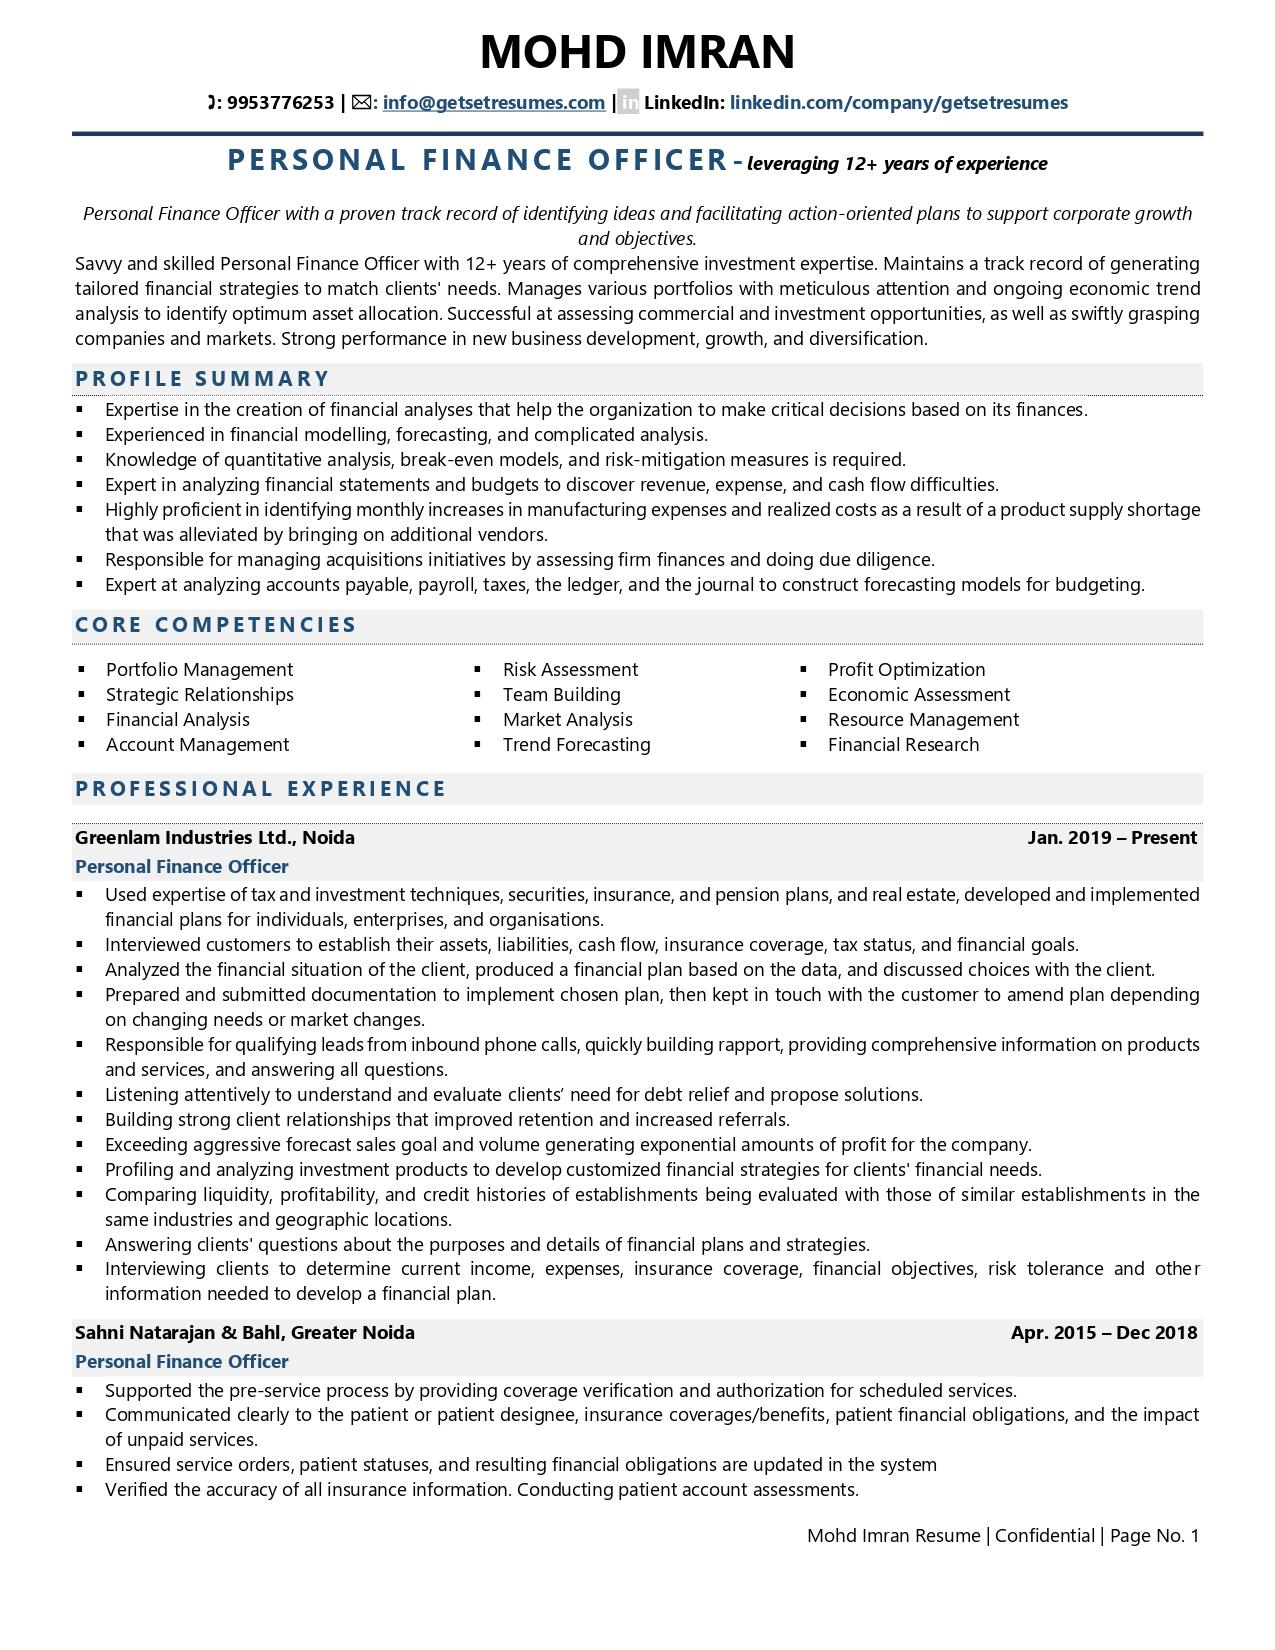 Personal Finance Officer - Resume Example & Template